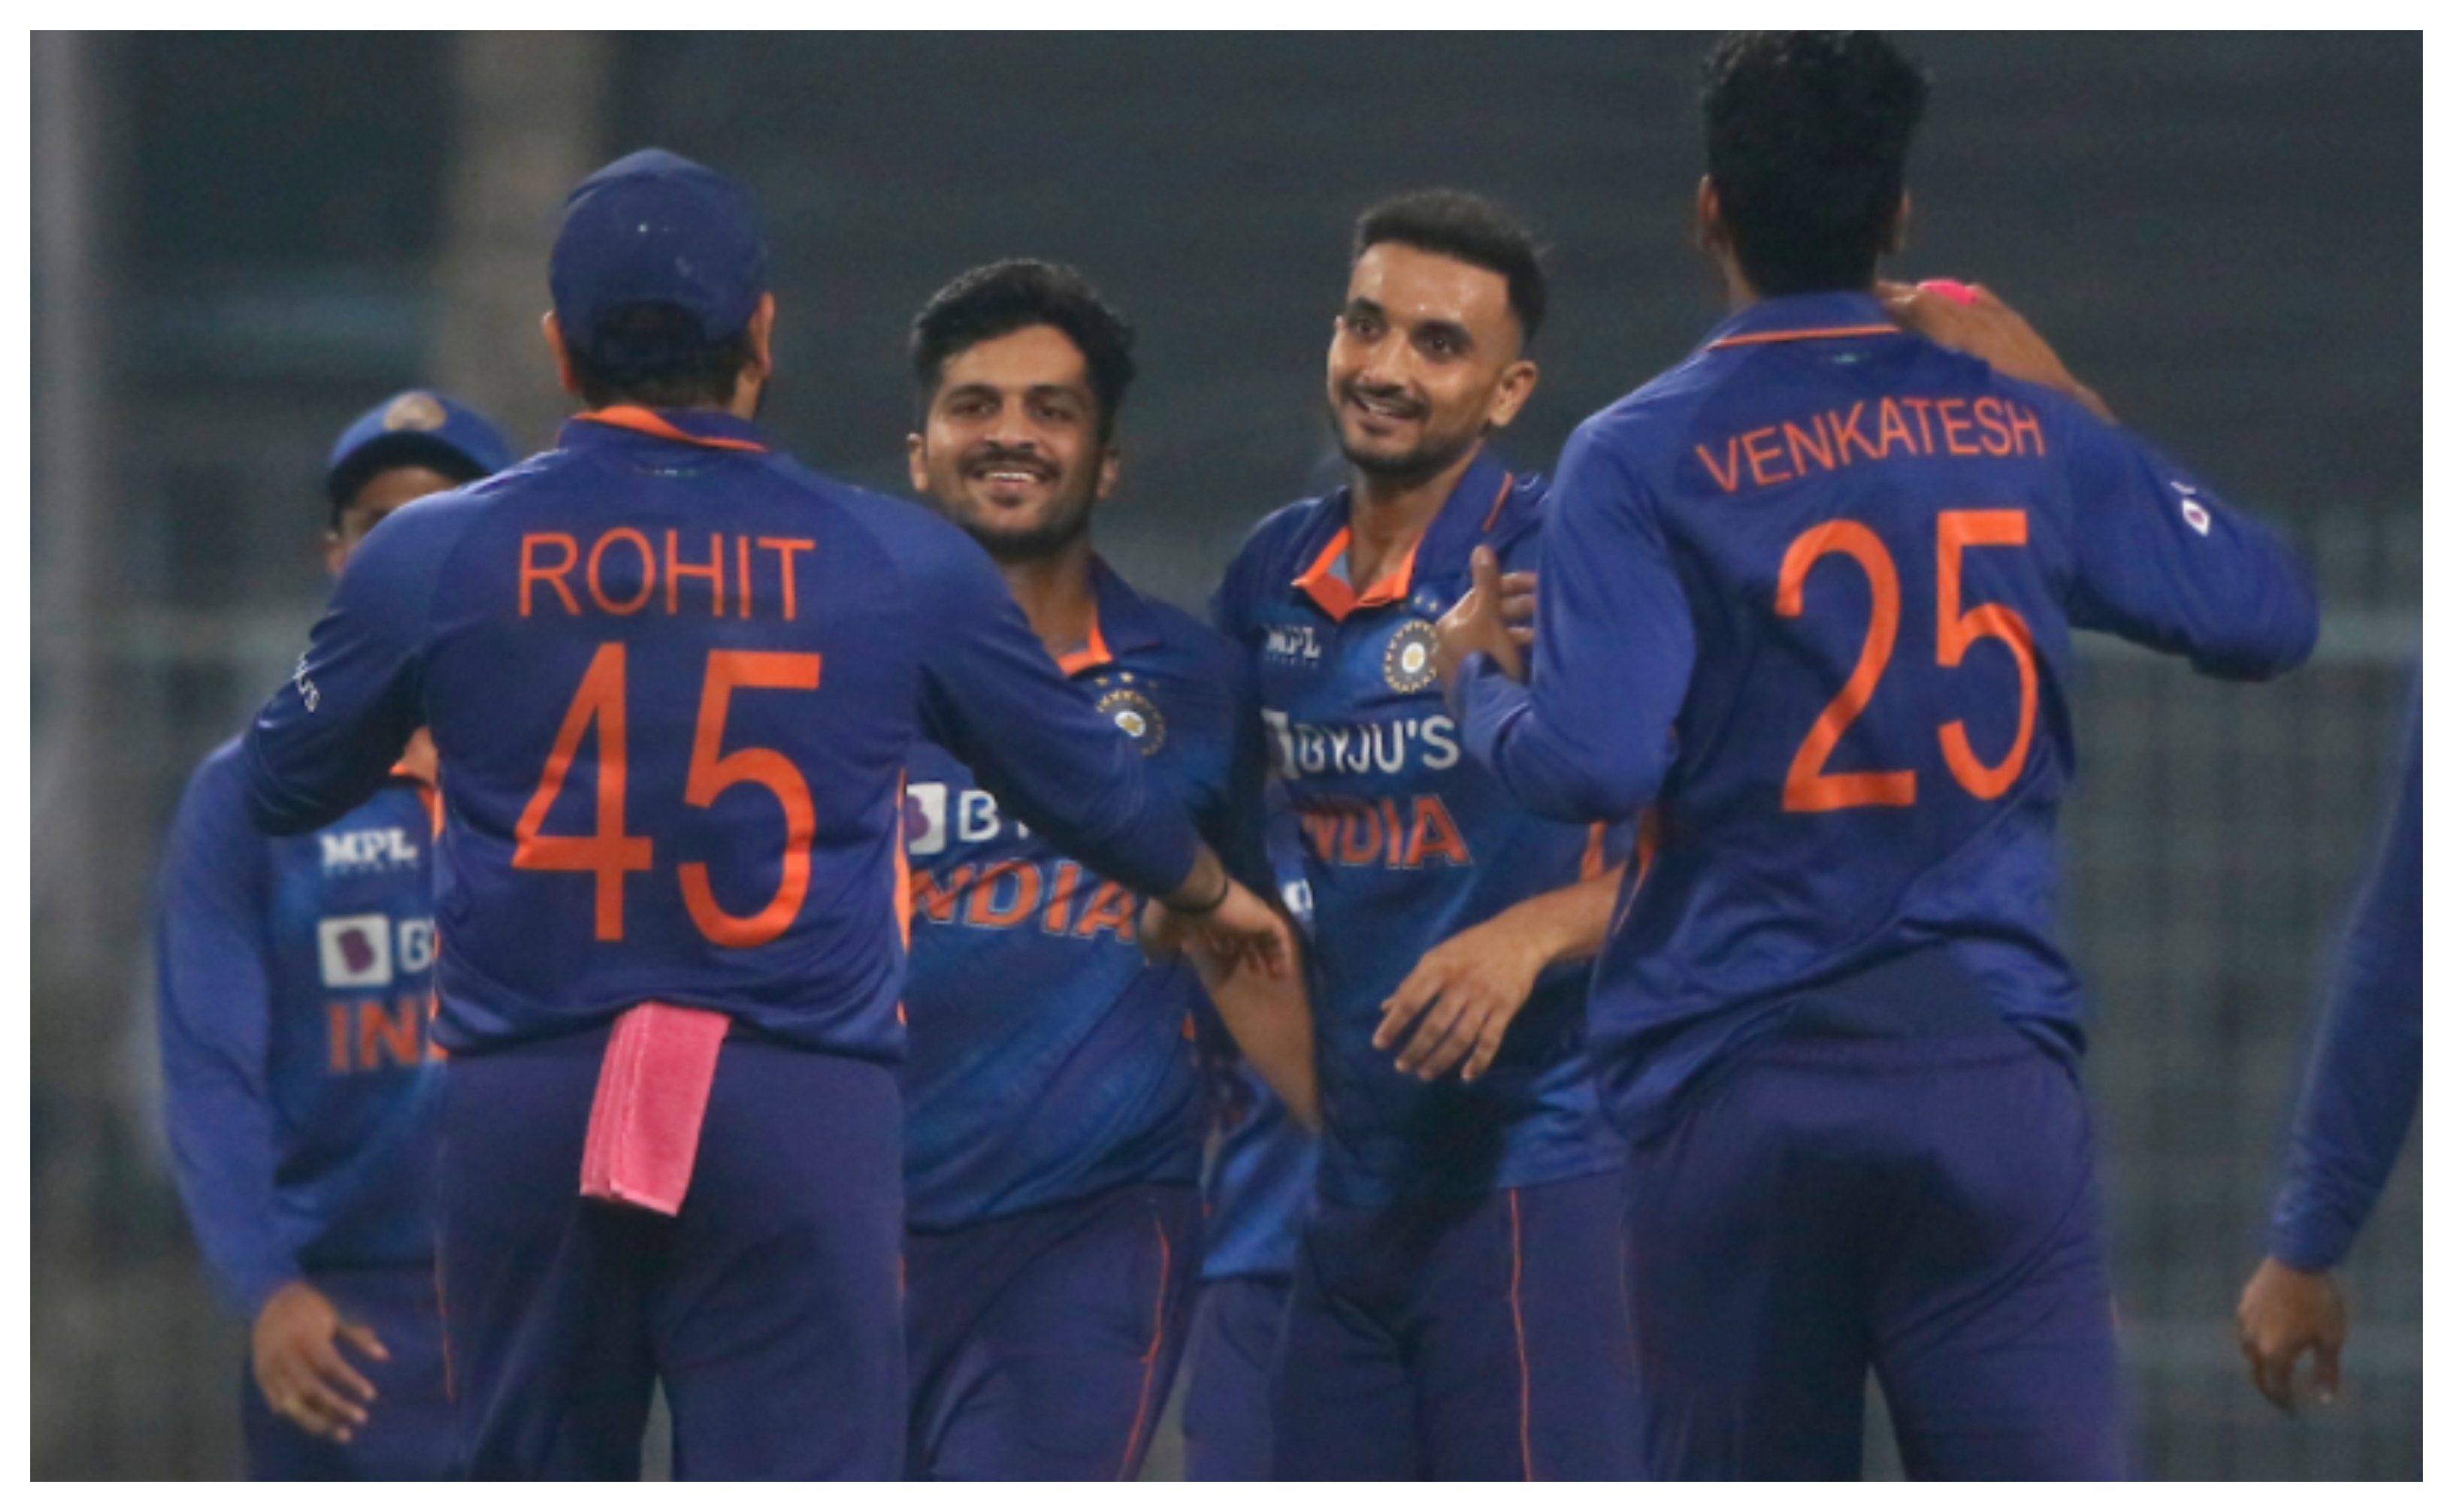 Team India outplayed West Indies in the T20I series | BCCI